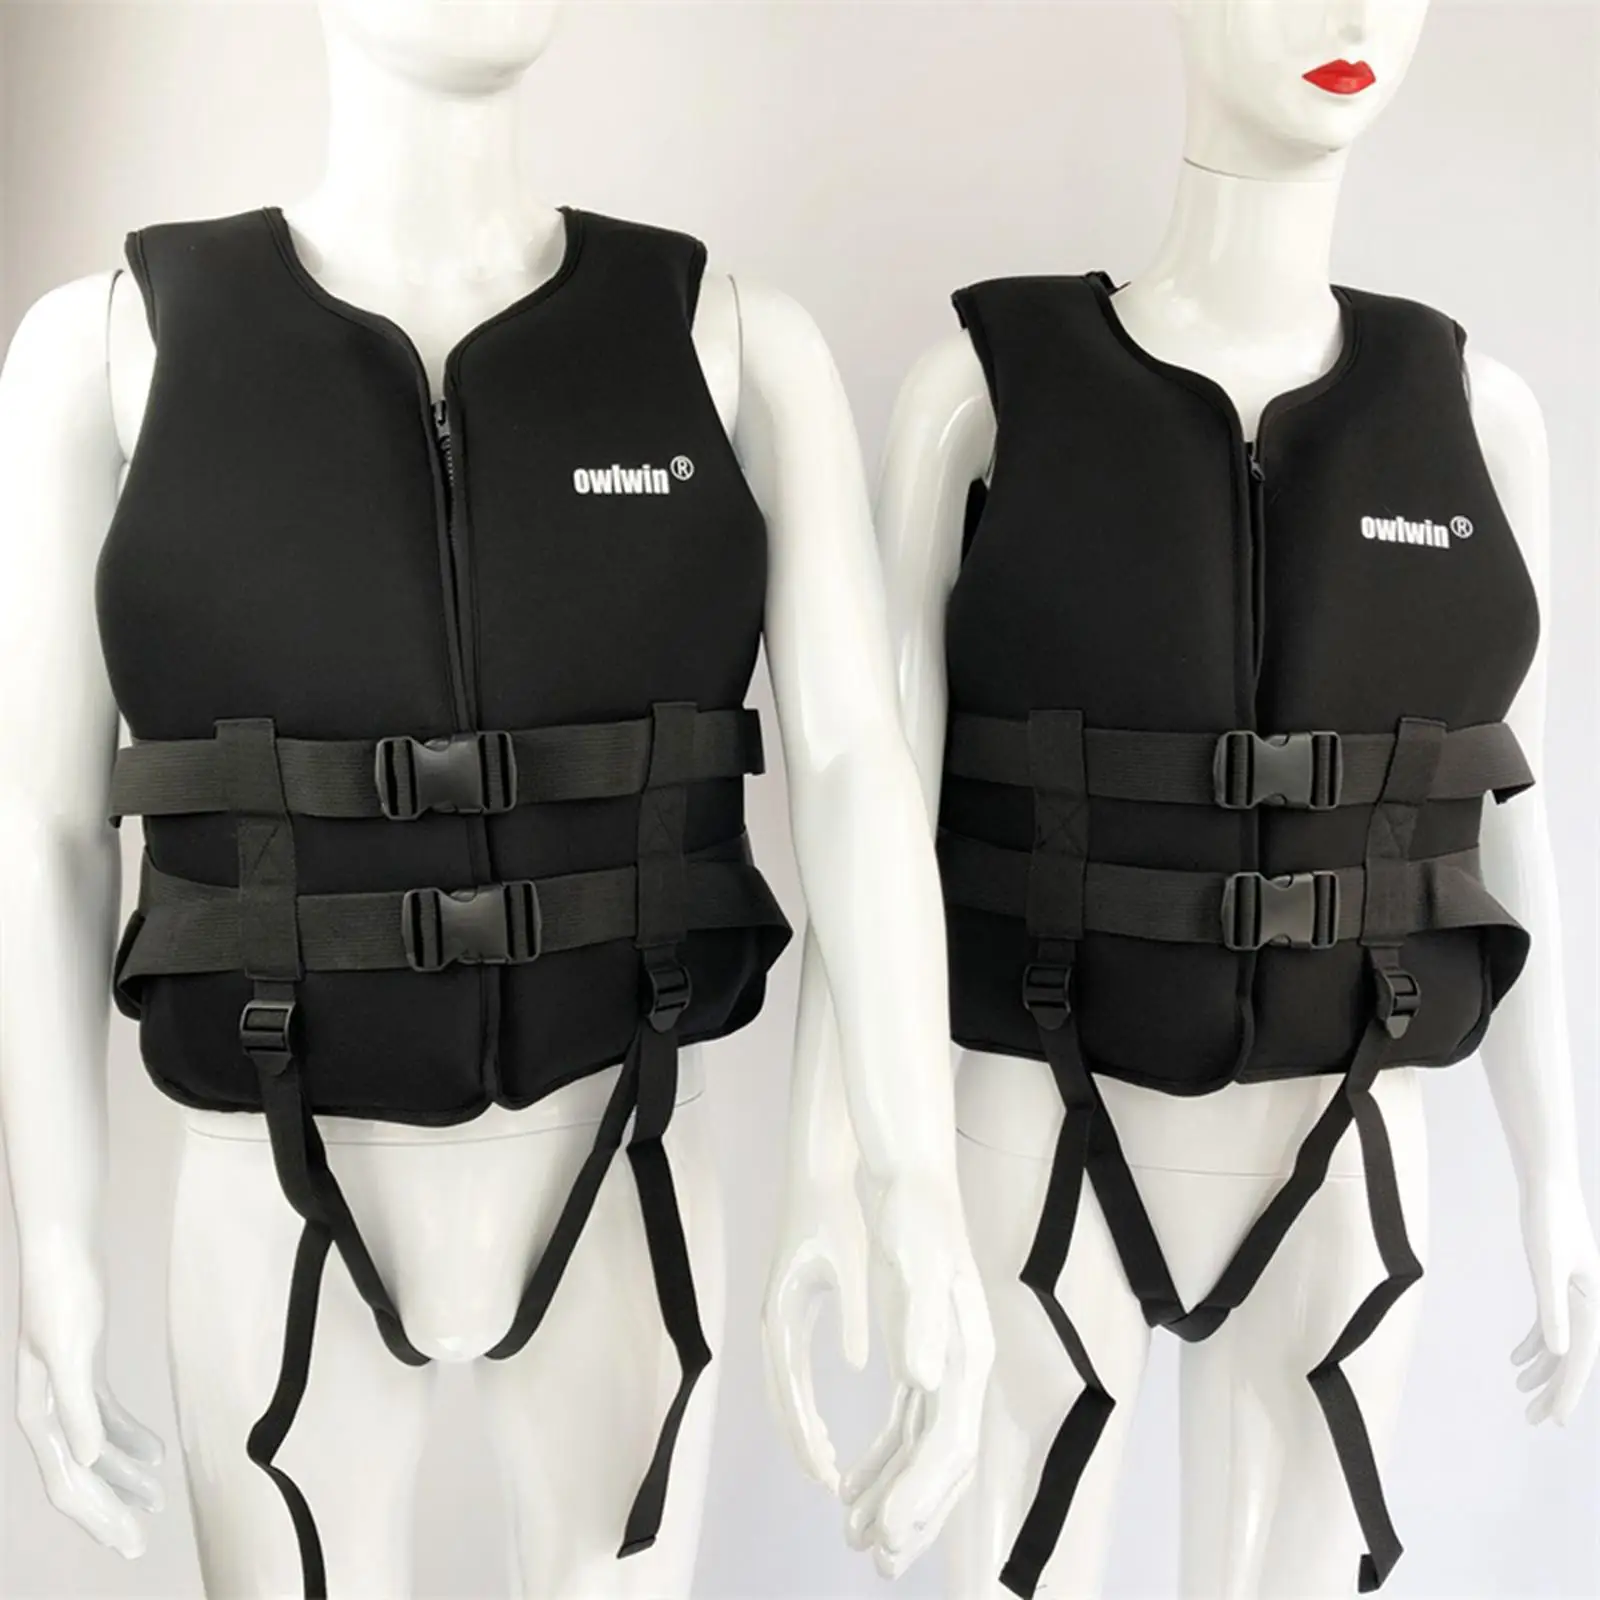 Water Sports Life Jacket Swimming Vest for Men Ladies Anti Scratch Elastic and Soft Fabric Waterproof Skin Friendly Comfortable